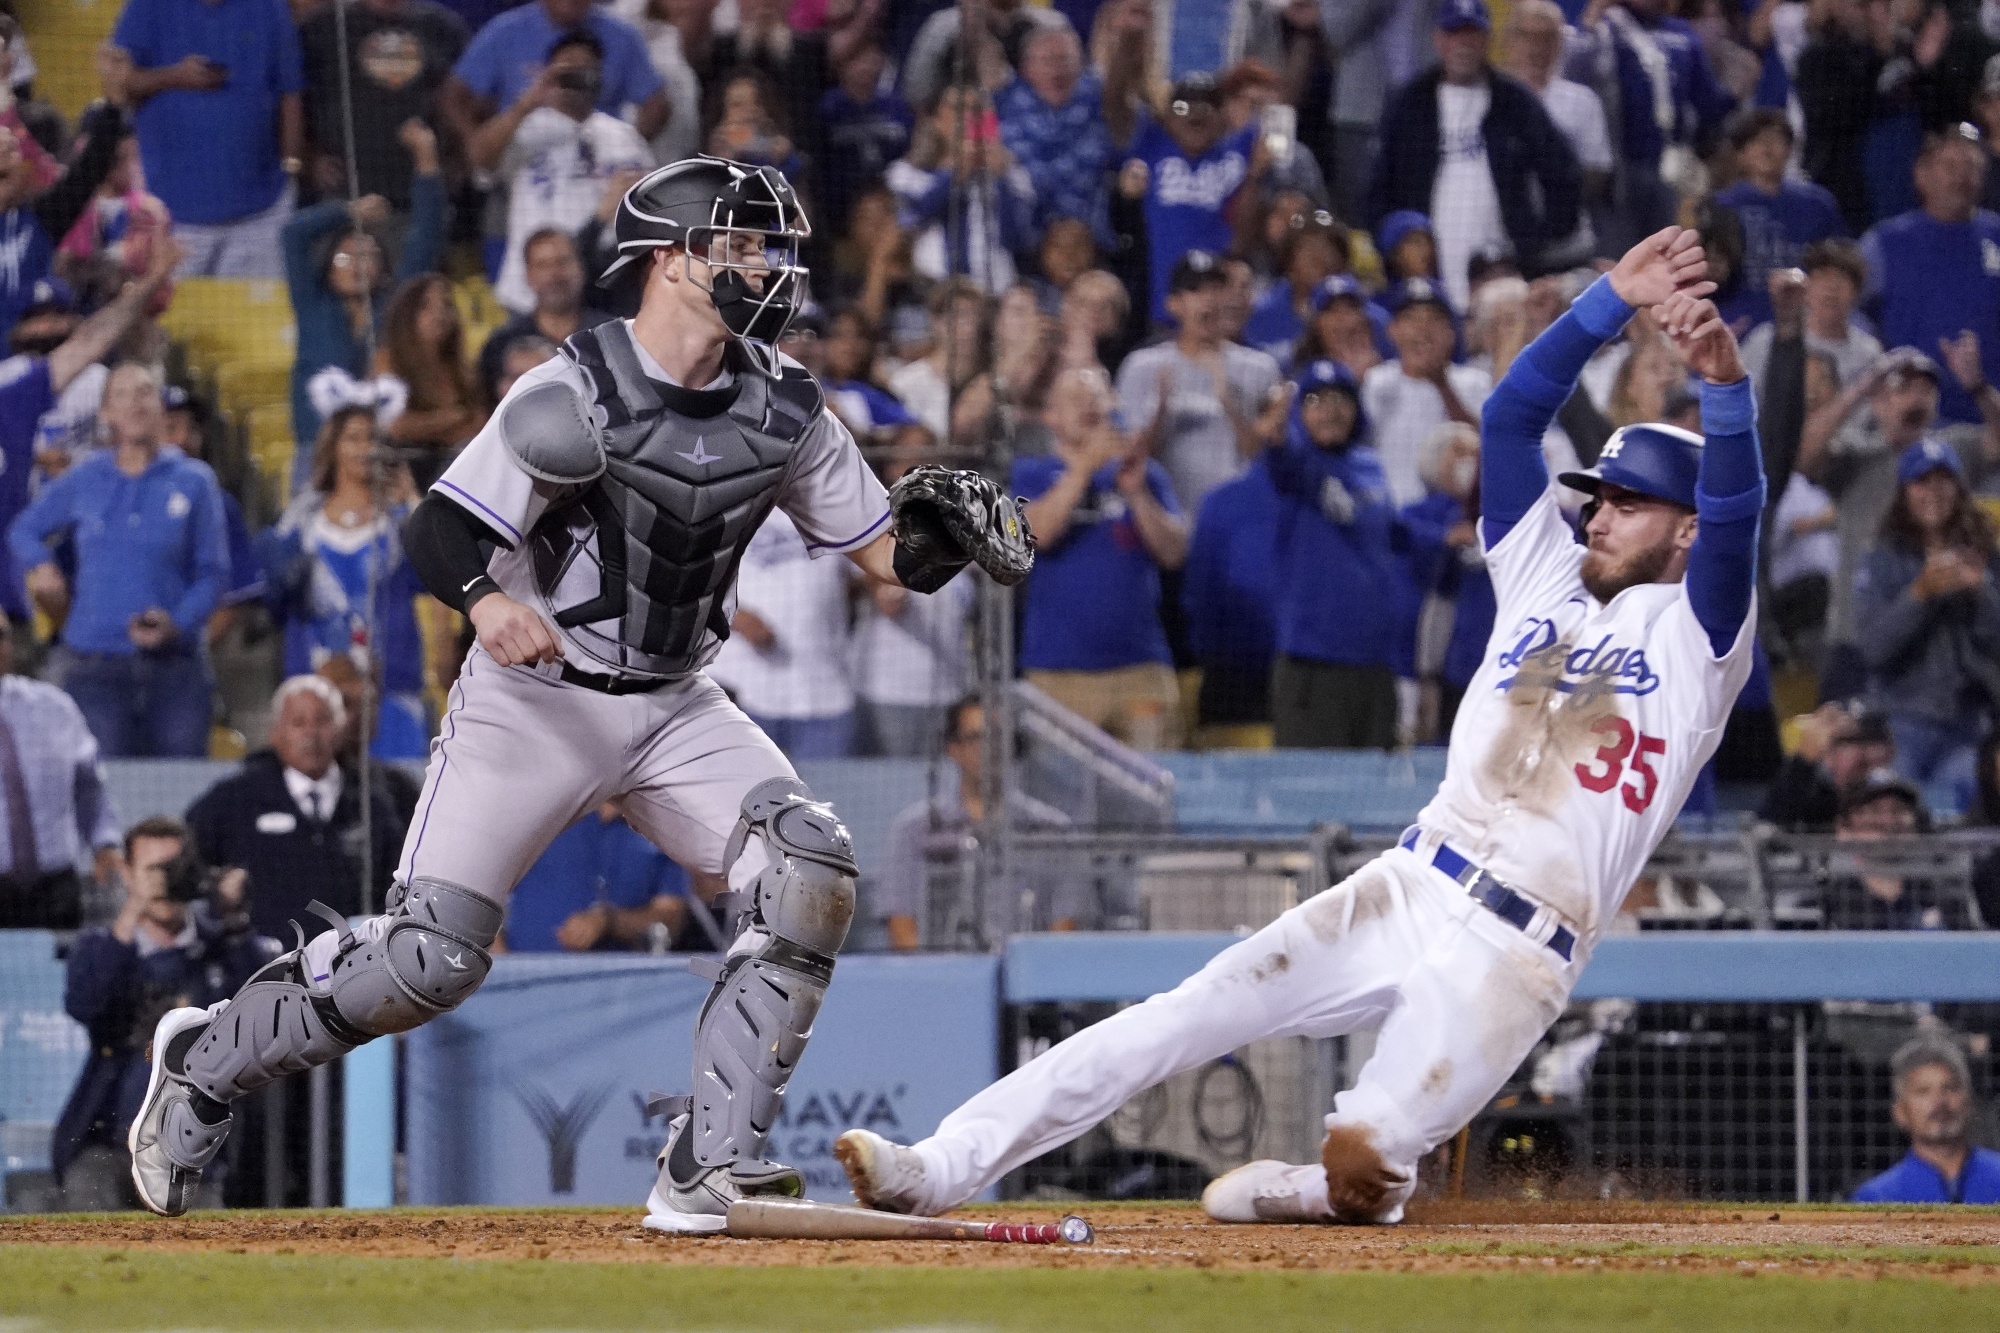 Dodgers catcher Will Smith improving but not looking to rush back